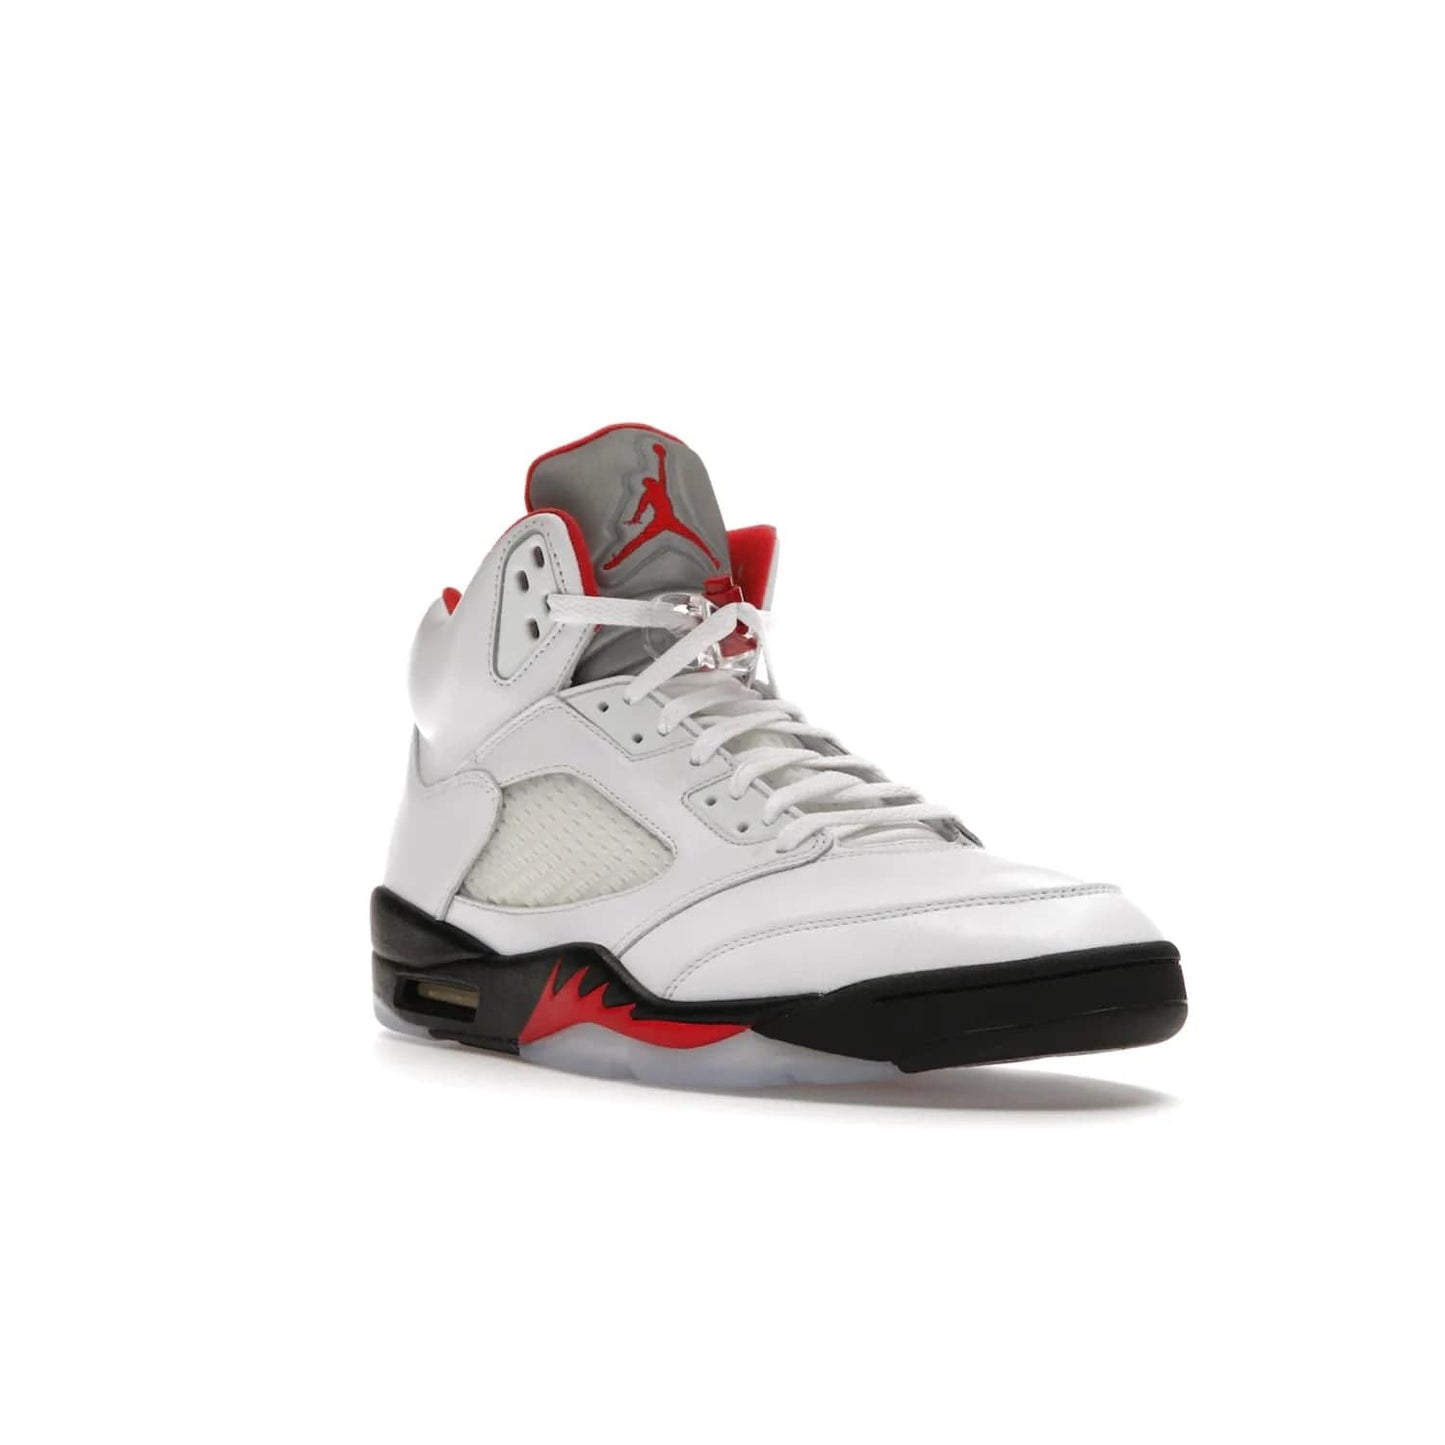 Jordan 5 Retro Fire Red Silver Tongue (2020) - Image 6 - Only at www.BallersClubKickz.com - Experience classic styling with the Jordan 5 Retro Fire Red Silver Tongue (2020). Features a white leather upper, 3M reflective tongue, midsole colorblocking, and an icy translucent outsole. Now available, upgrade your shoe collection today.